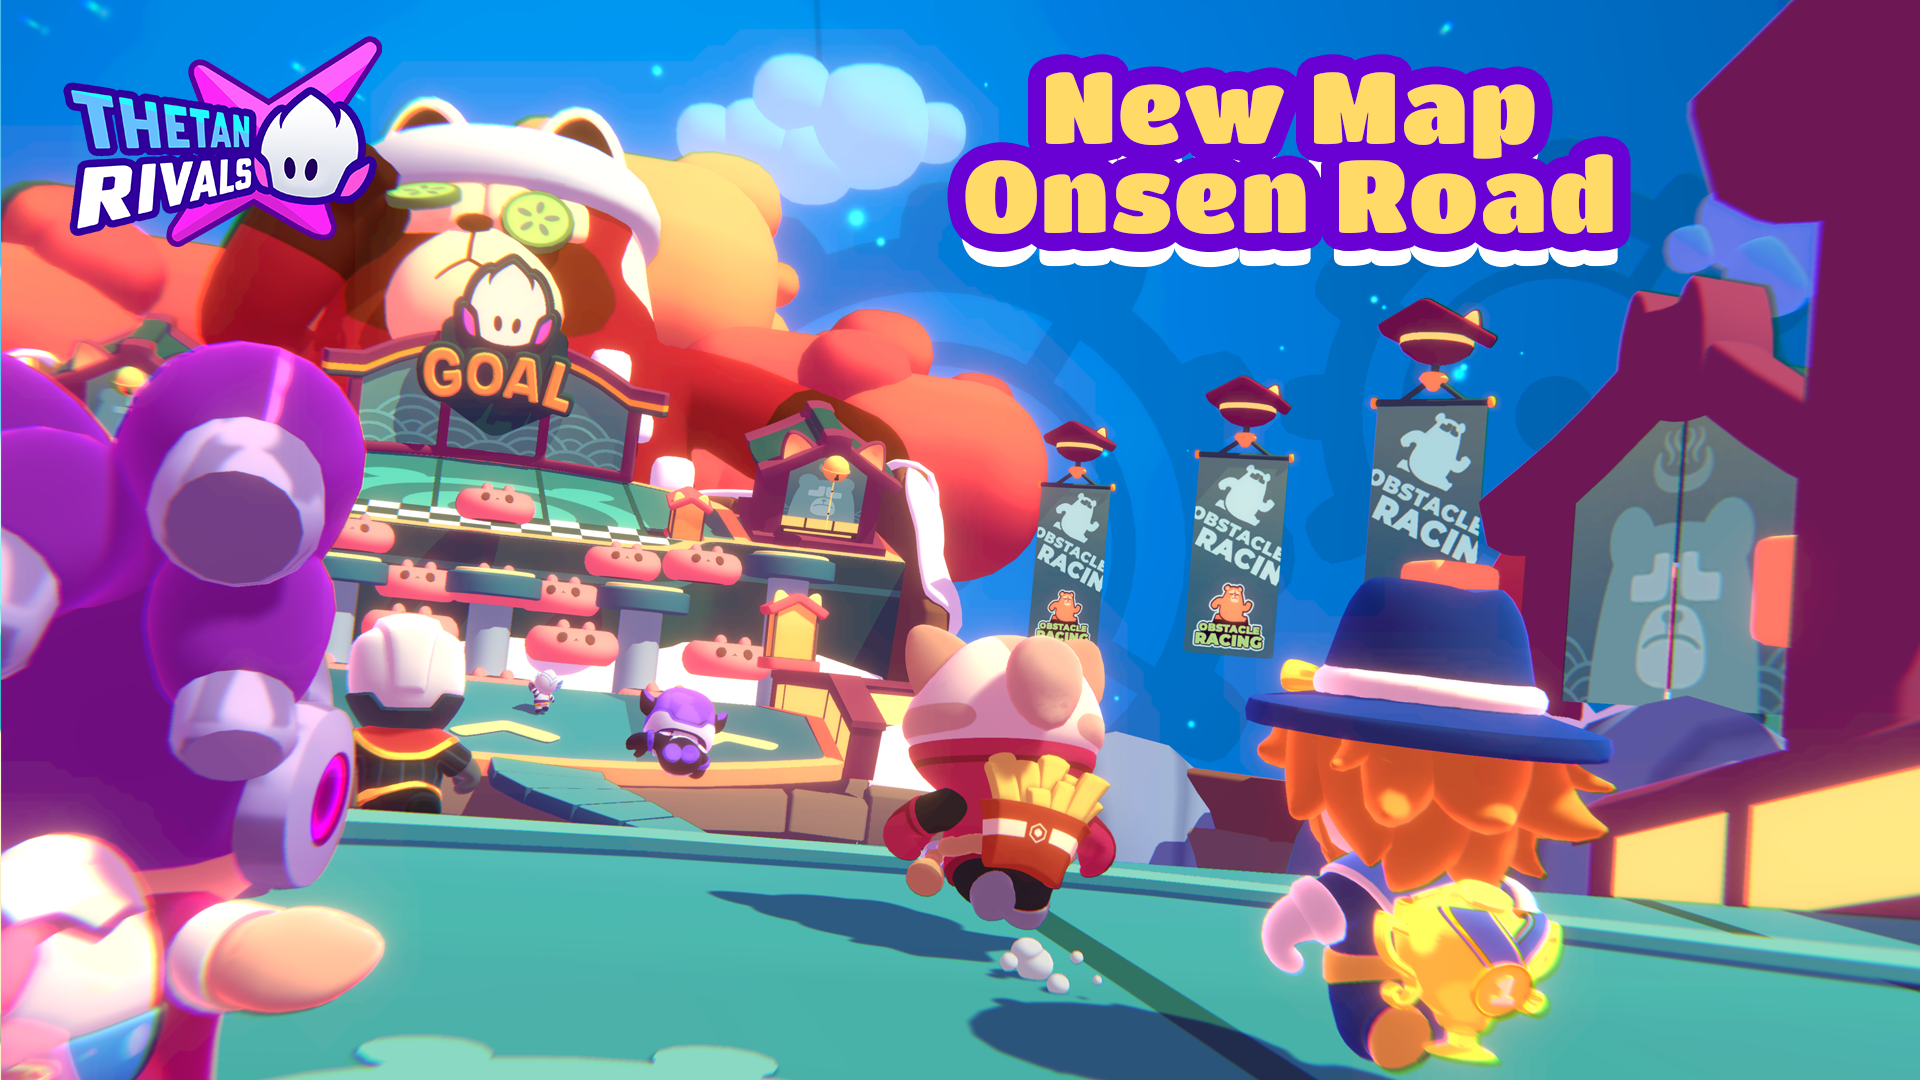 New Onsen Road map is coming to Thetan Rivals